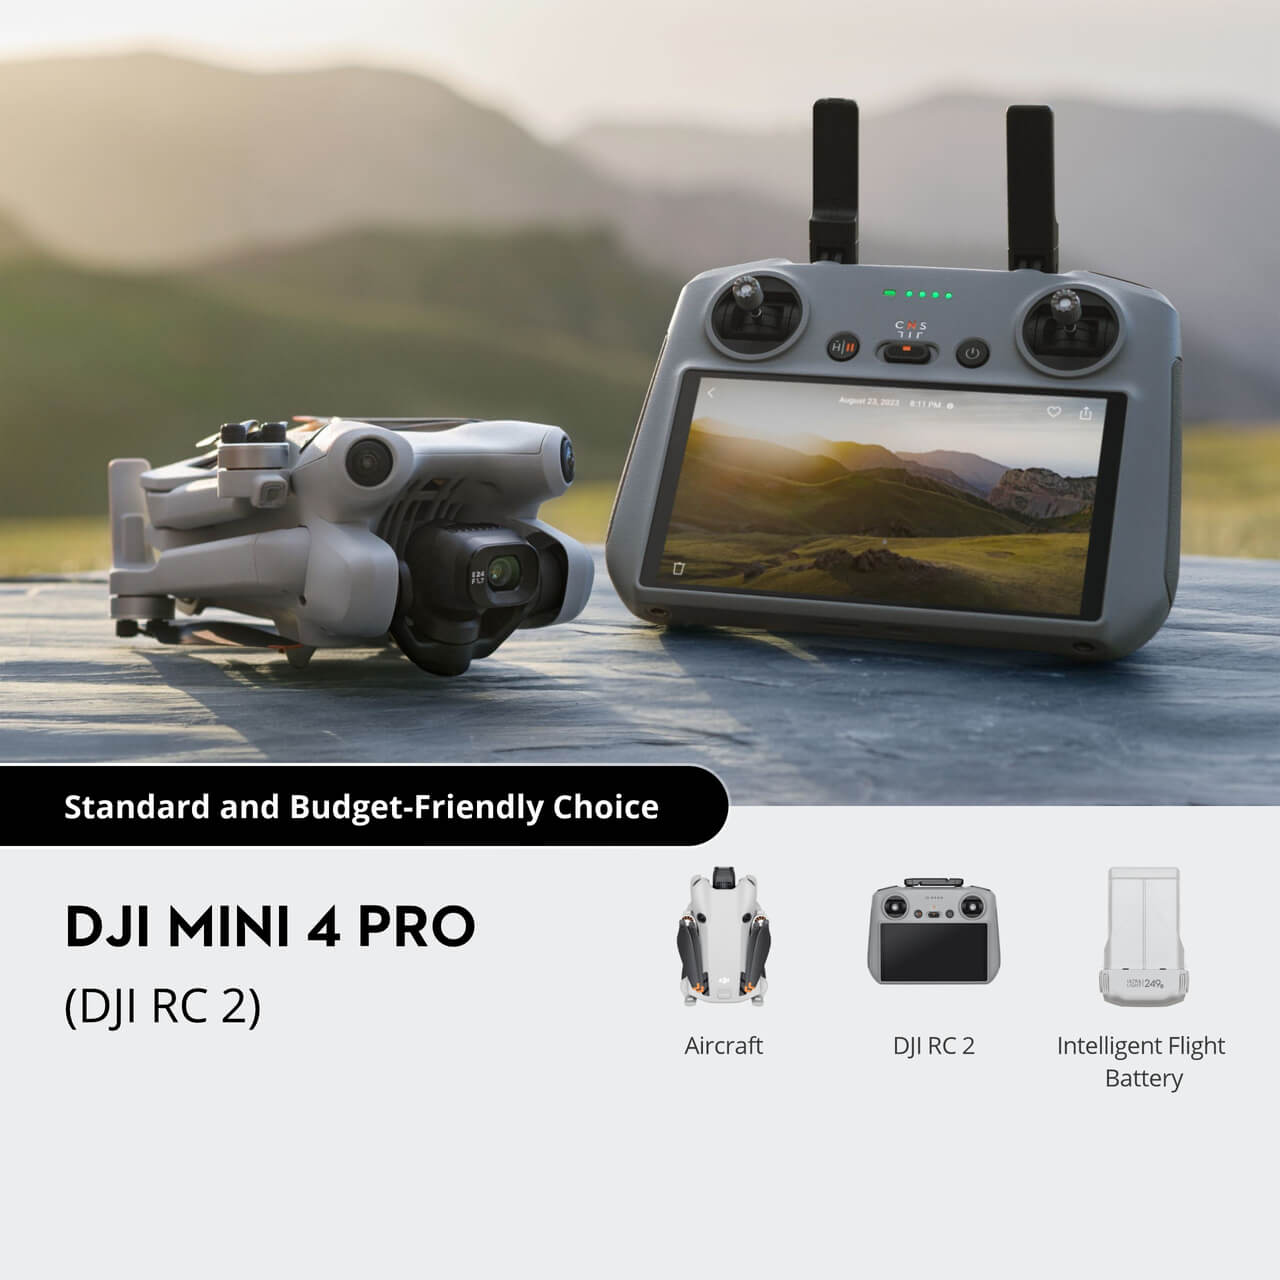 DJI Mini 4 Pro Drone and RC 2 Remote Control with Built-in Screen